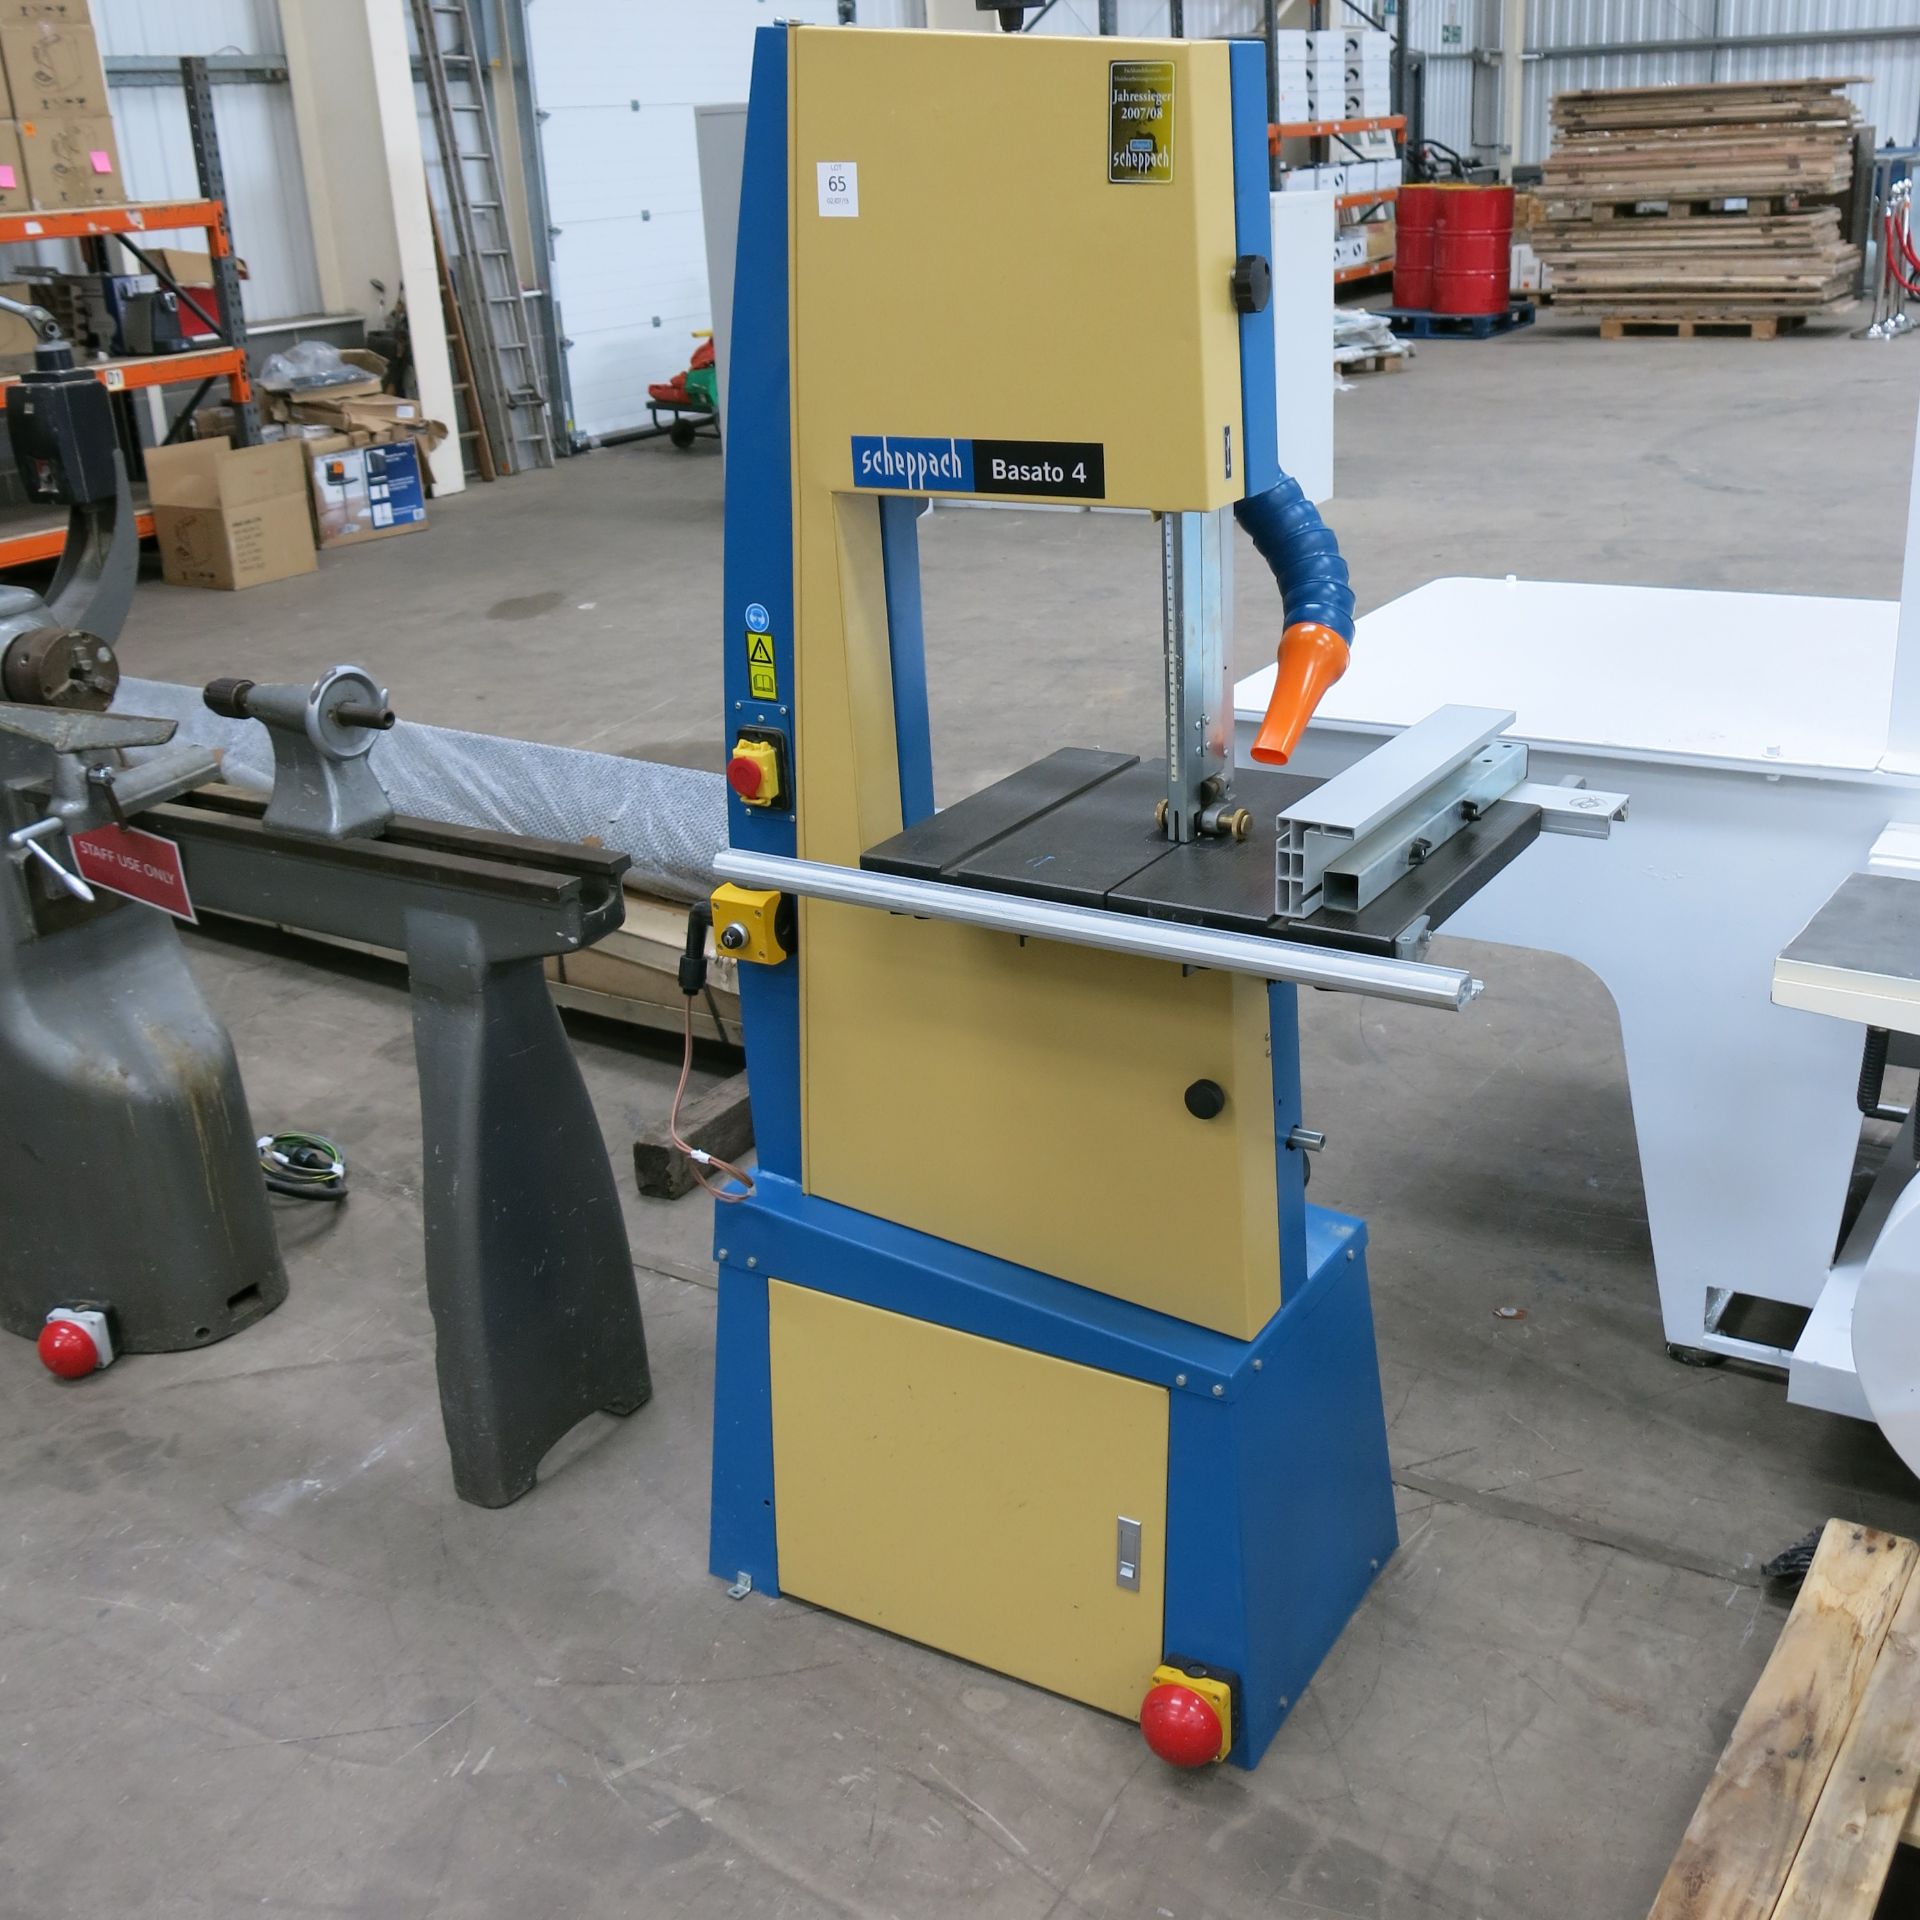 * A Scheppach Basato 4 Bandsaw MIT UG 240V. Please note, there is a £5 plus vat handling fee on this